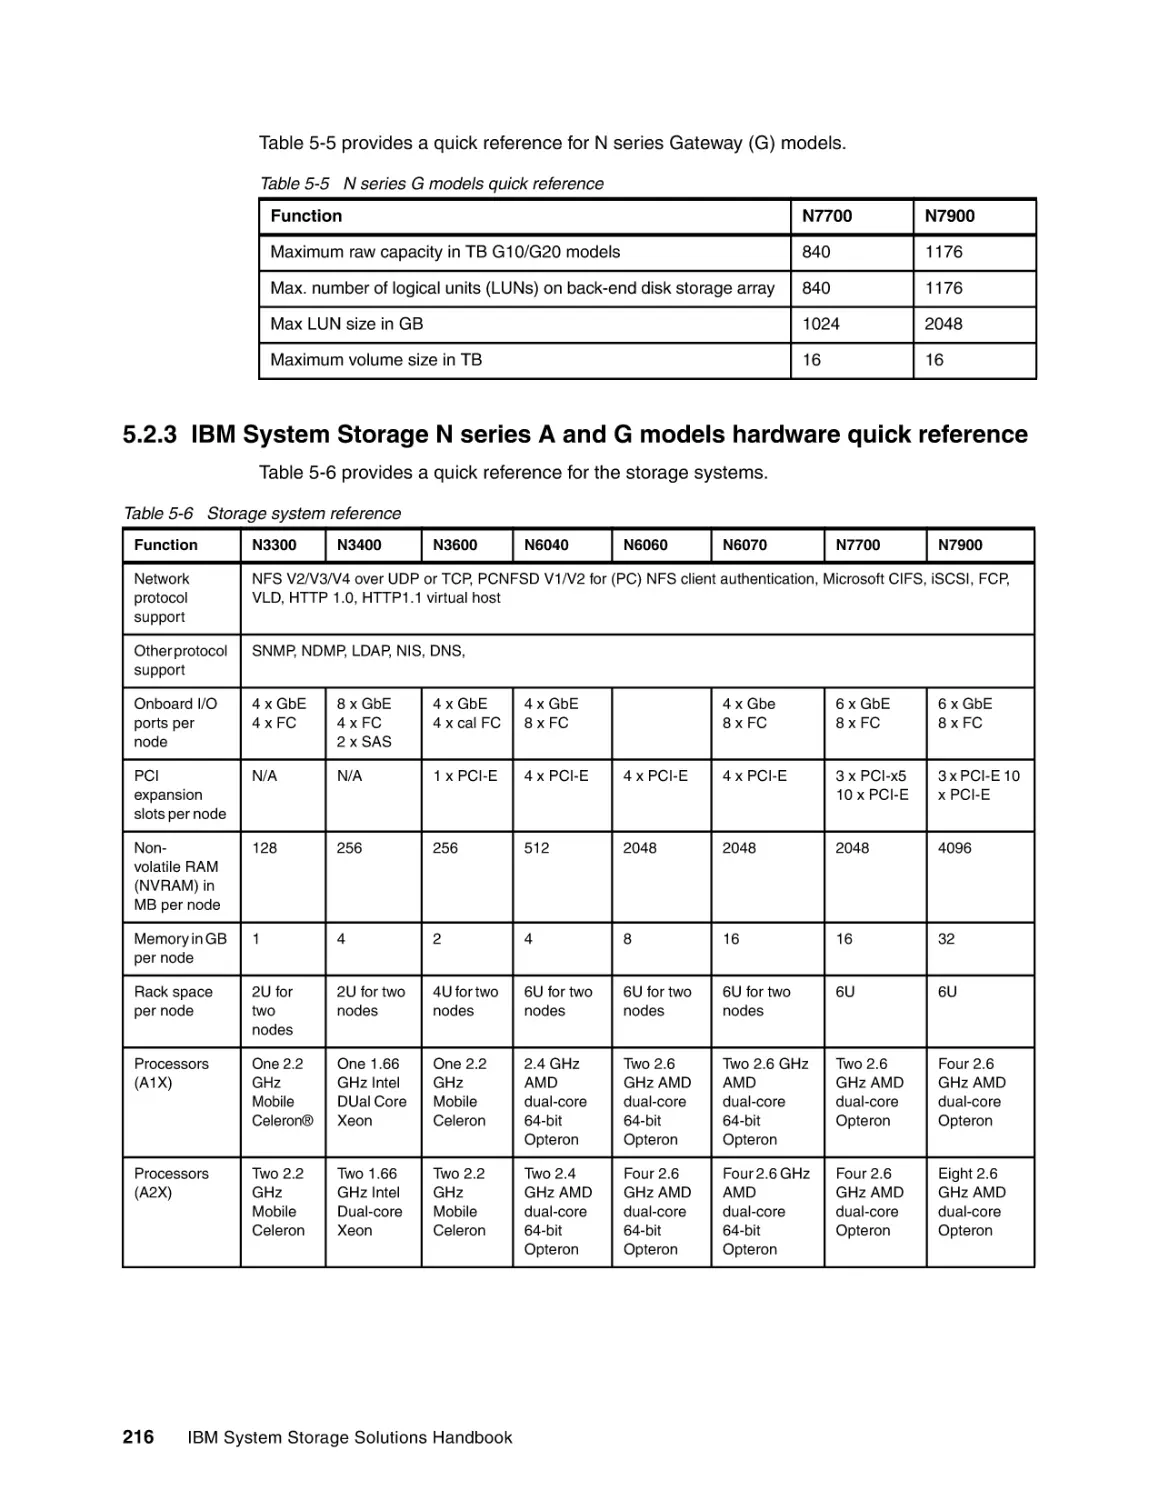 5.2.3 IBM System Storage N series A and G models hardware quick reference